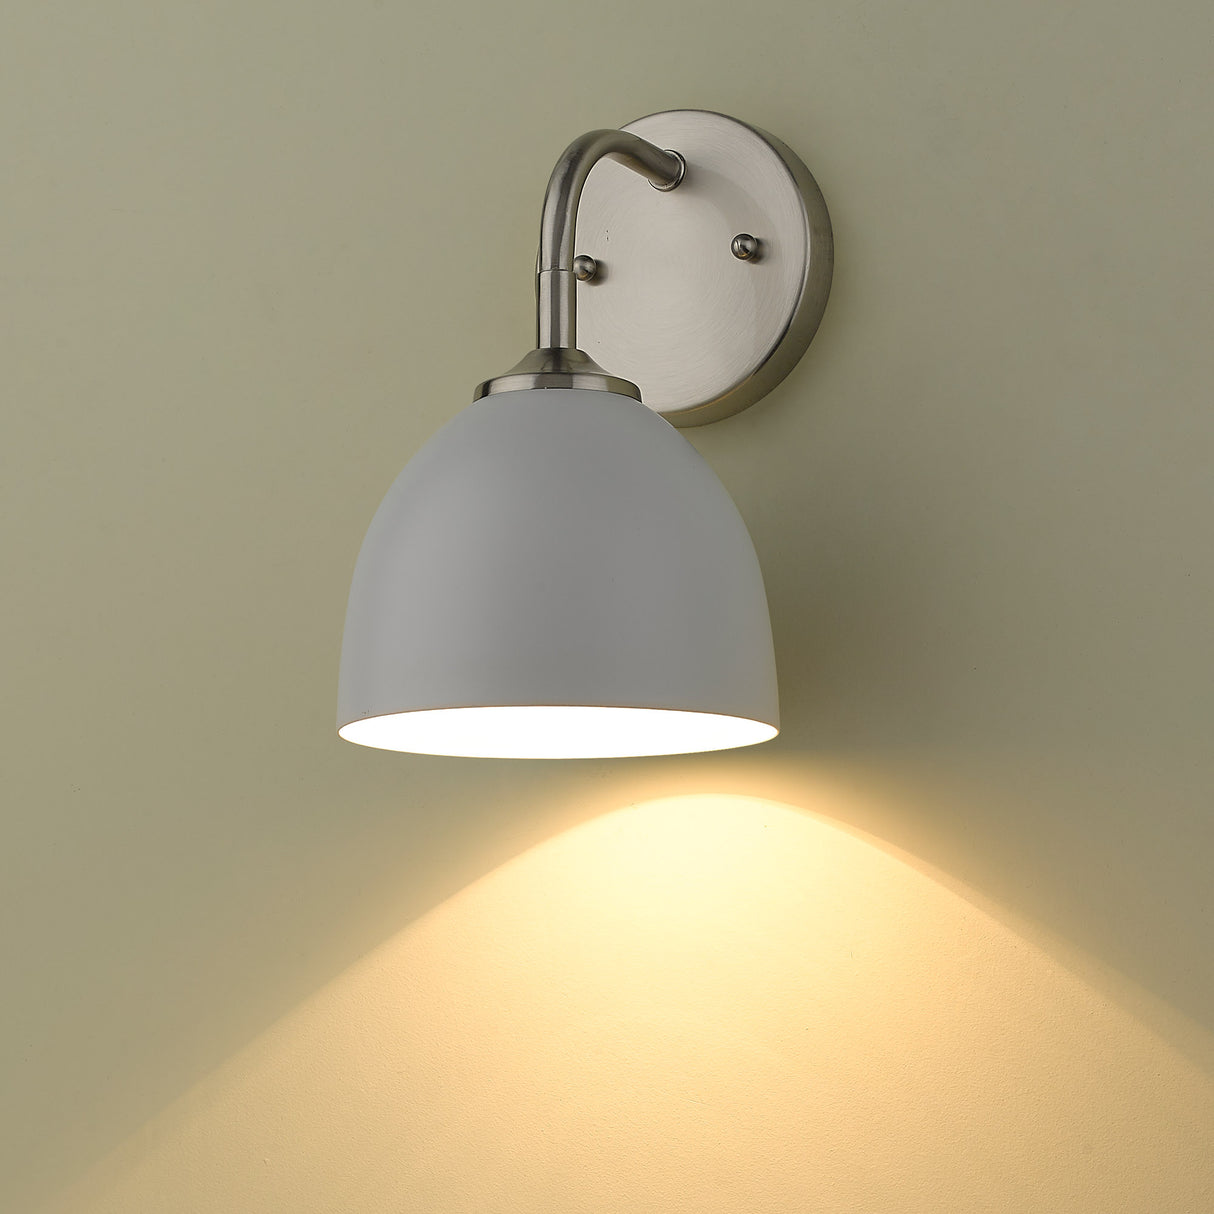 Zoey 1-Light Wall Sconce in Pewter with Matte White Shade